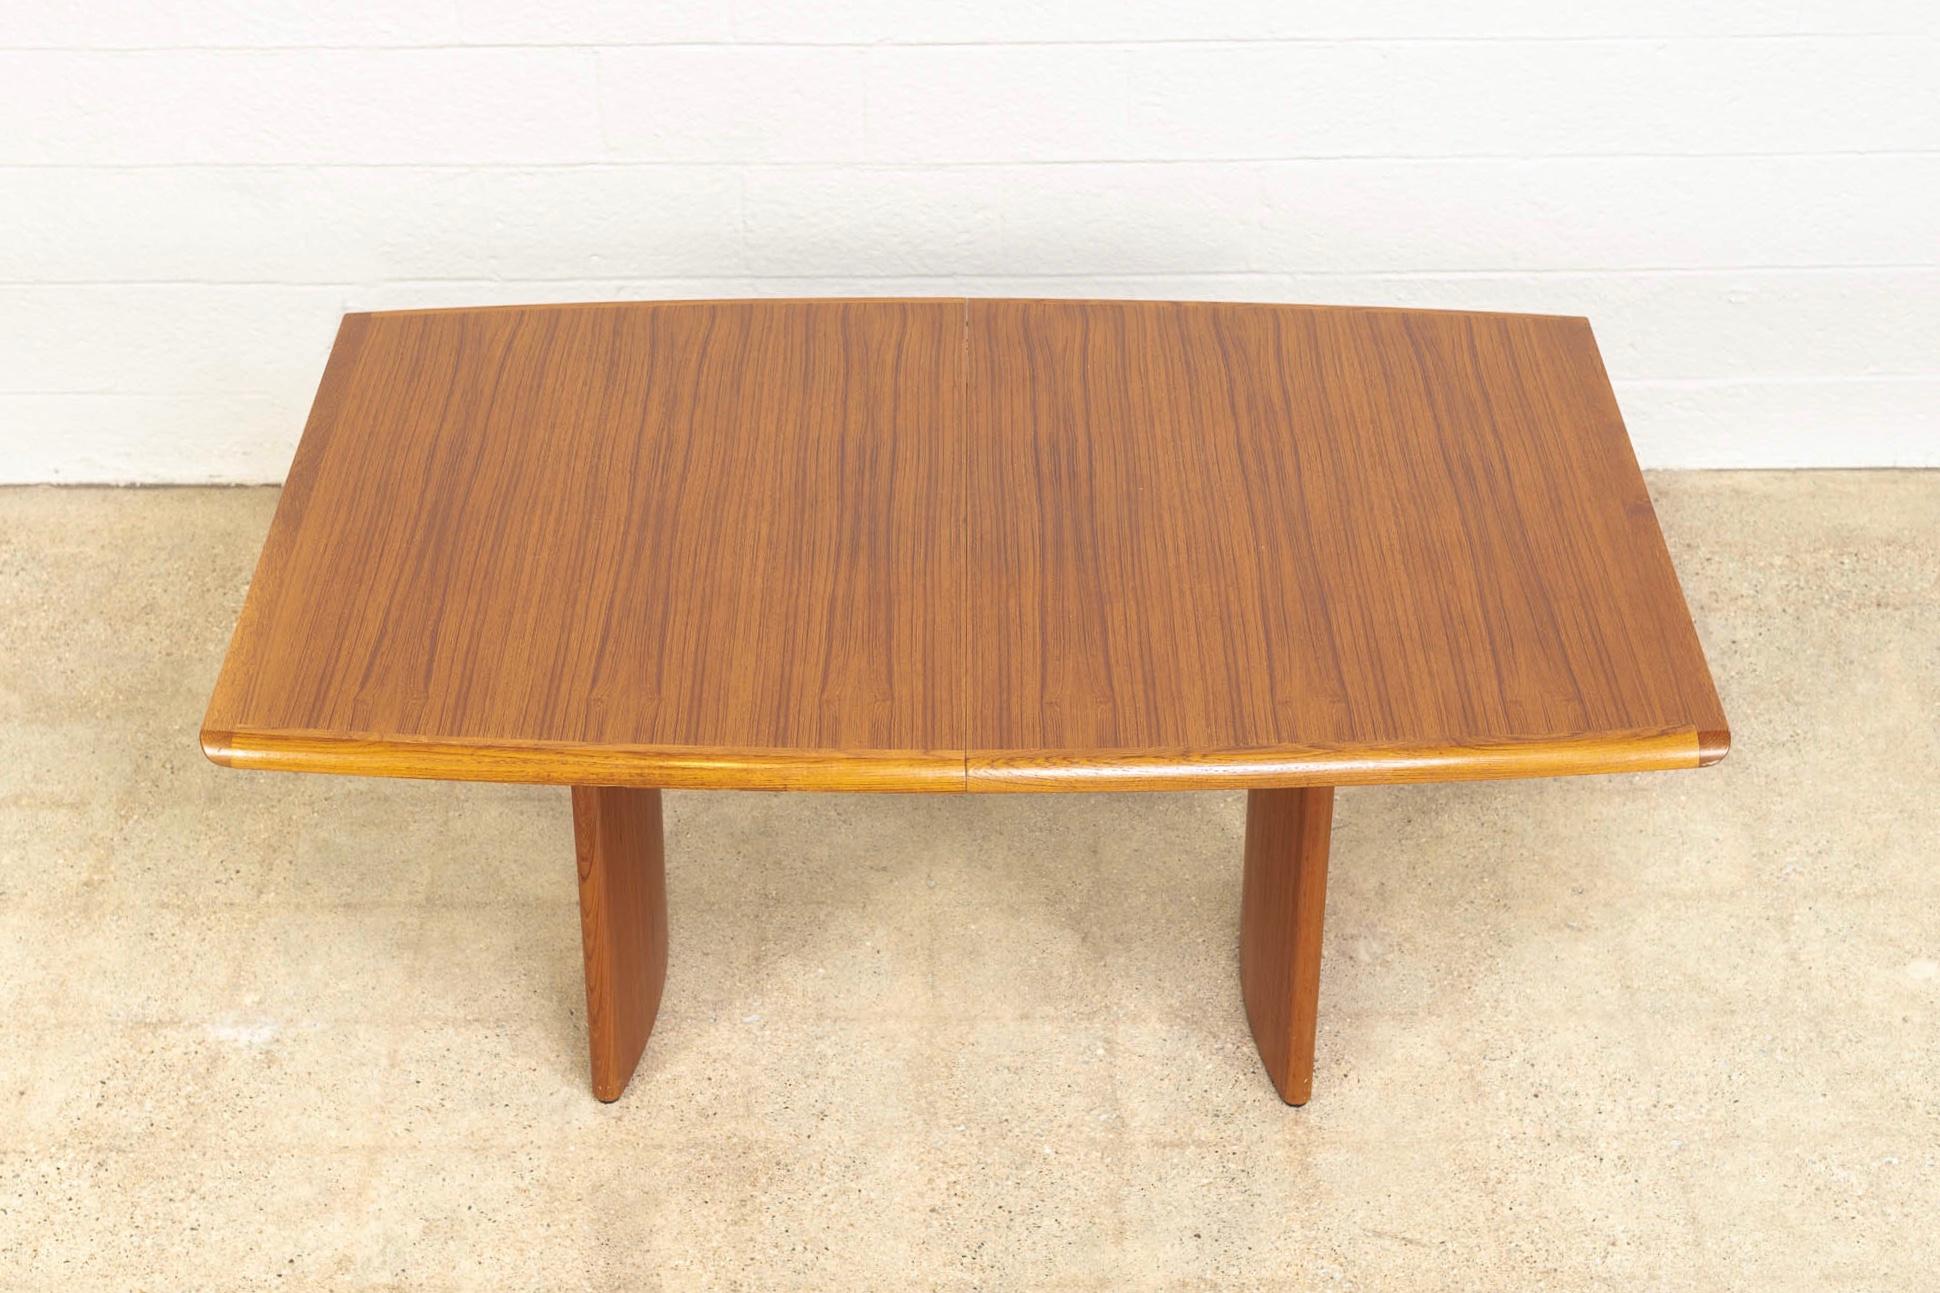 Vintage Danish Modern Teak Wood Extendable Dining Table with Two Leaves, 1960s In Good Condition For Sale In Detroit, MI